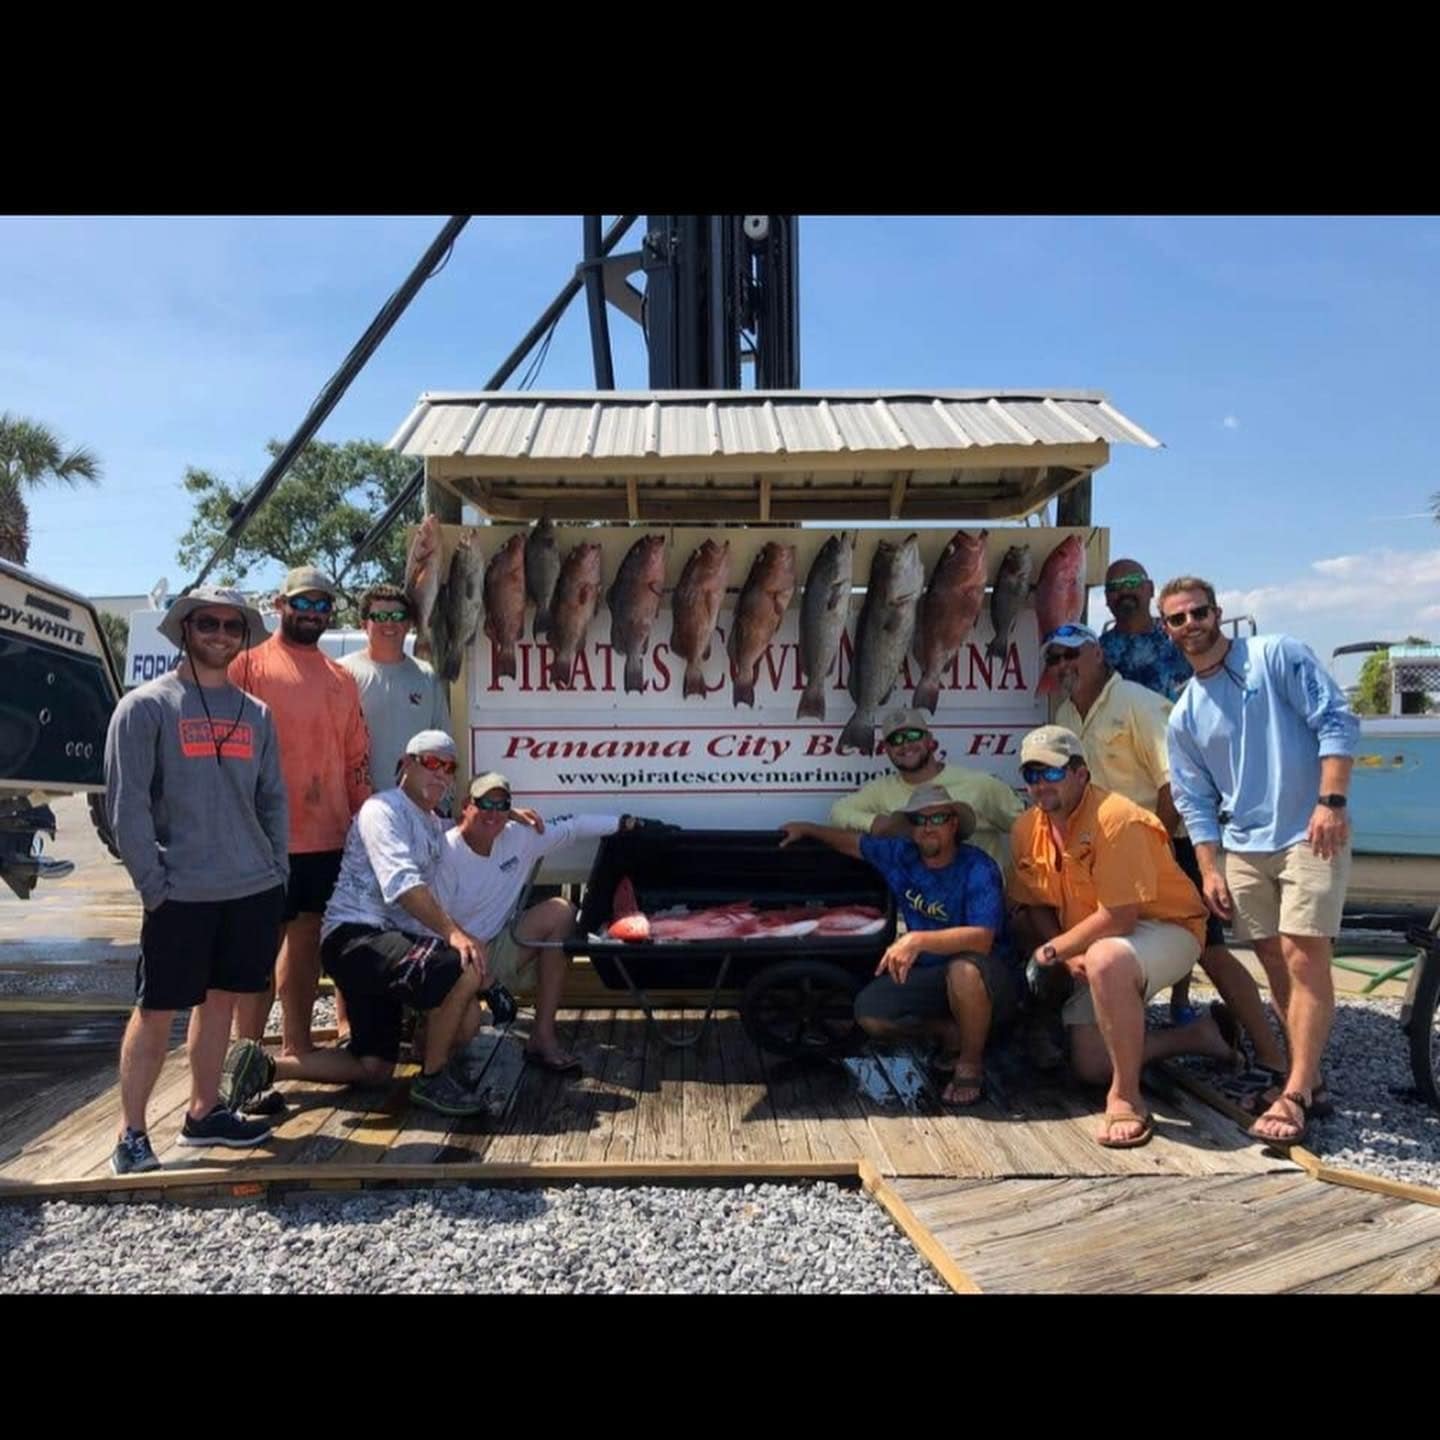 Annual guys fishing trip out of PCB - The Hull Truth - Boating and Fishing  Forum